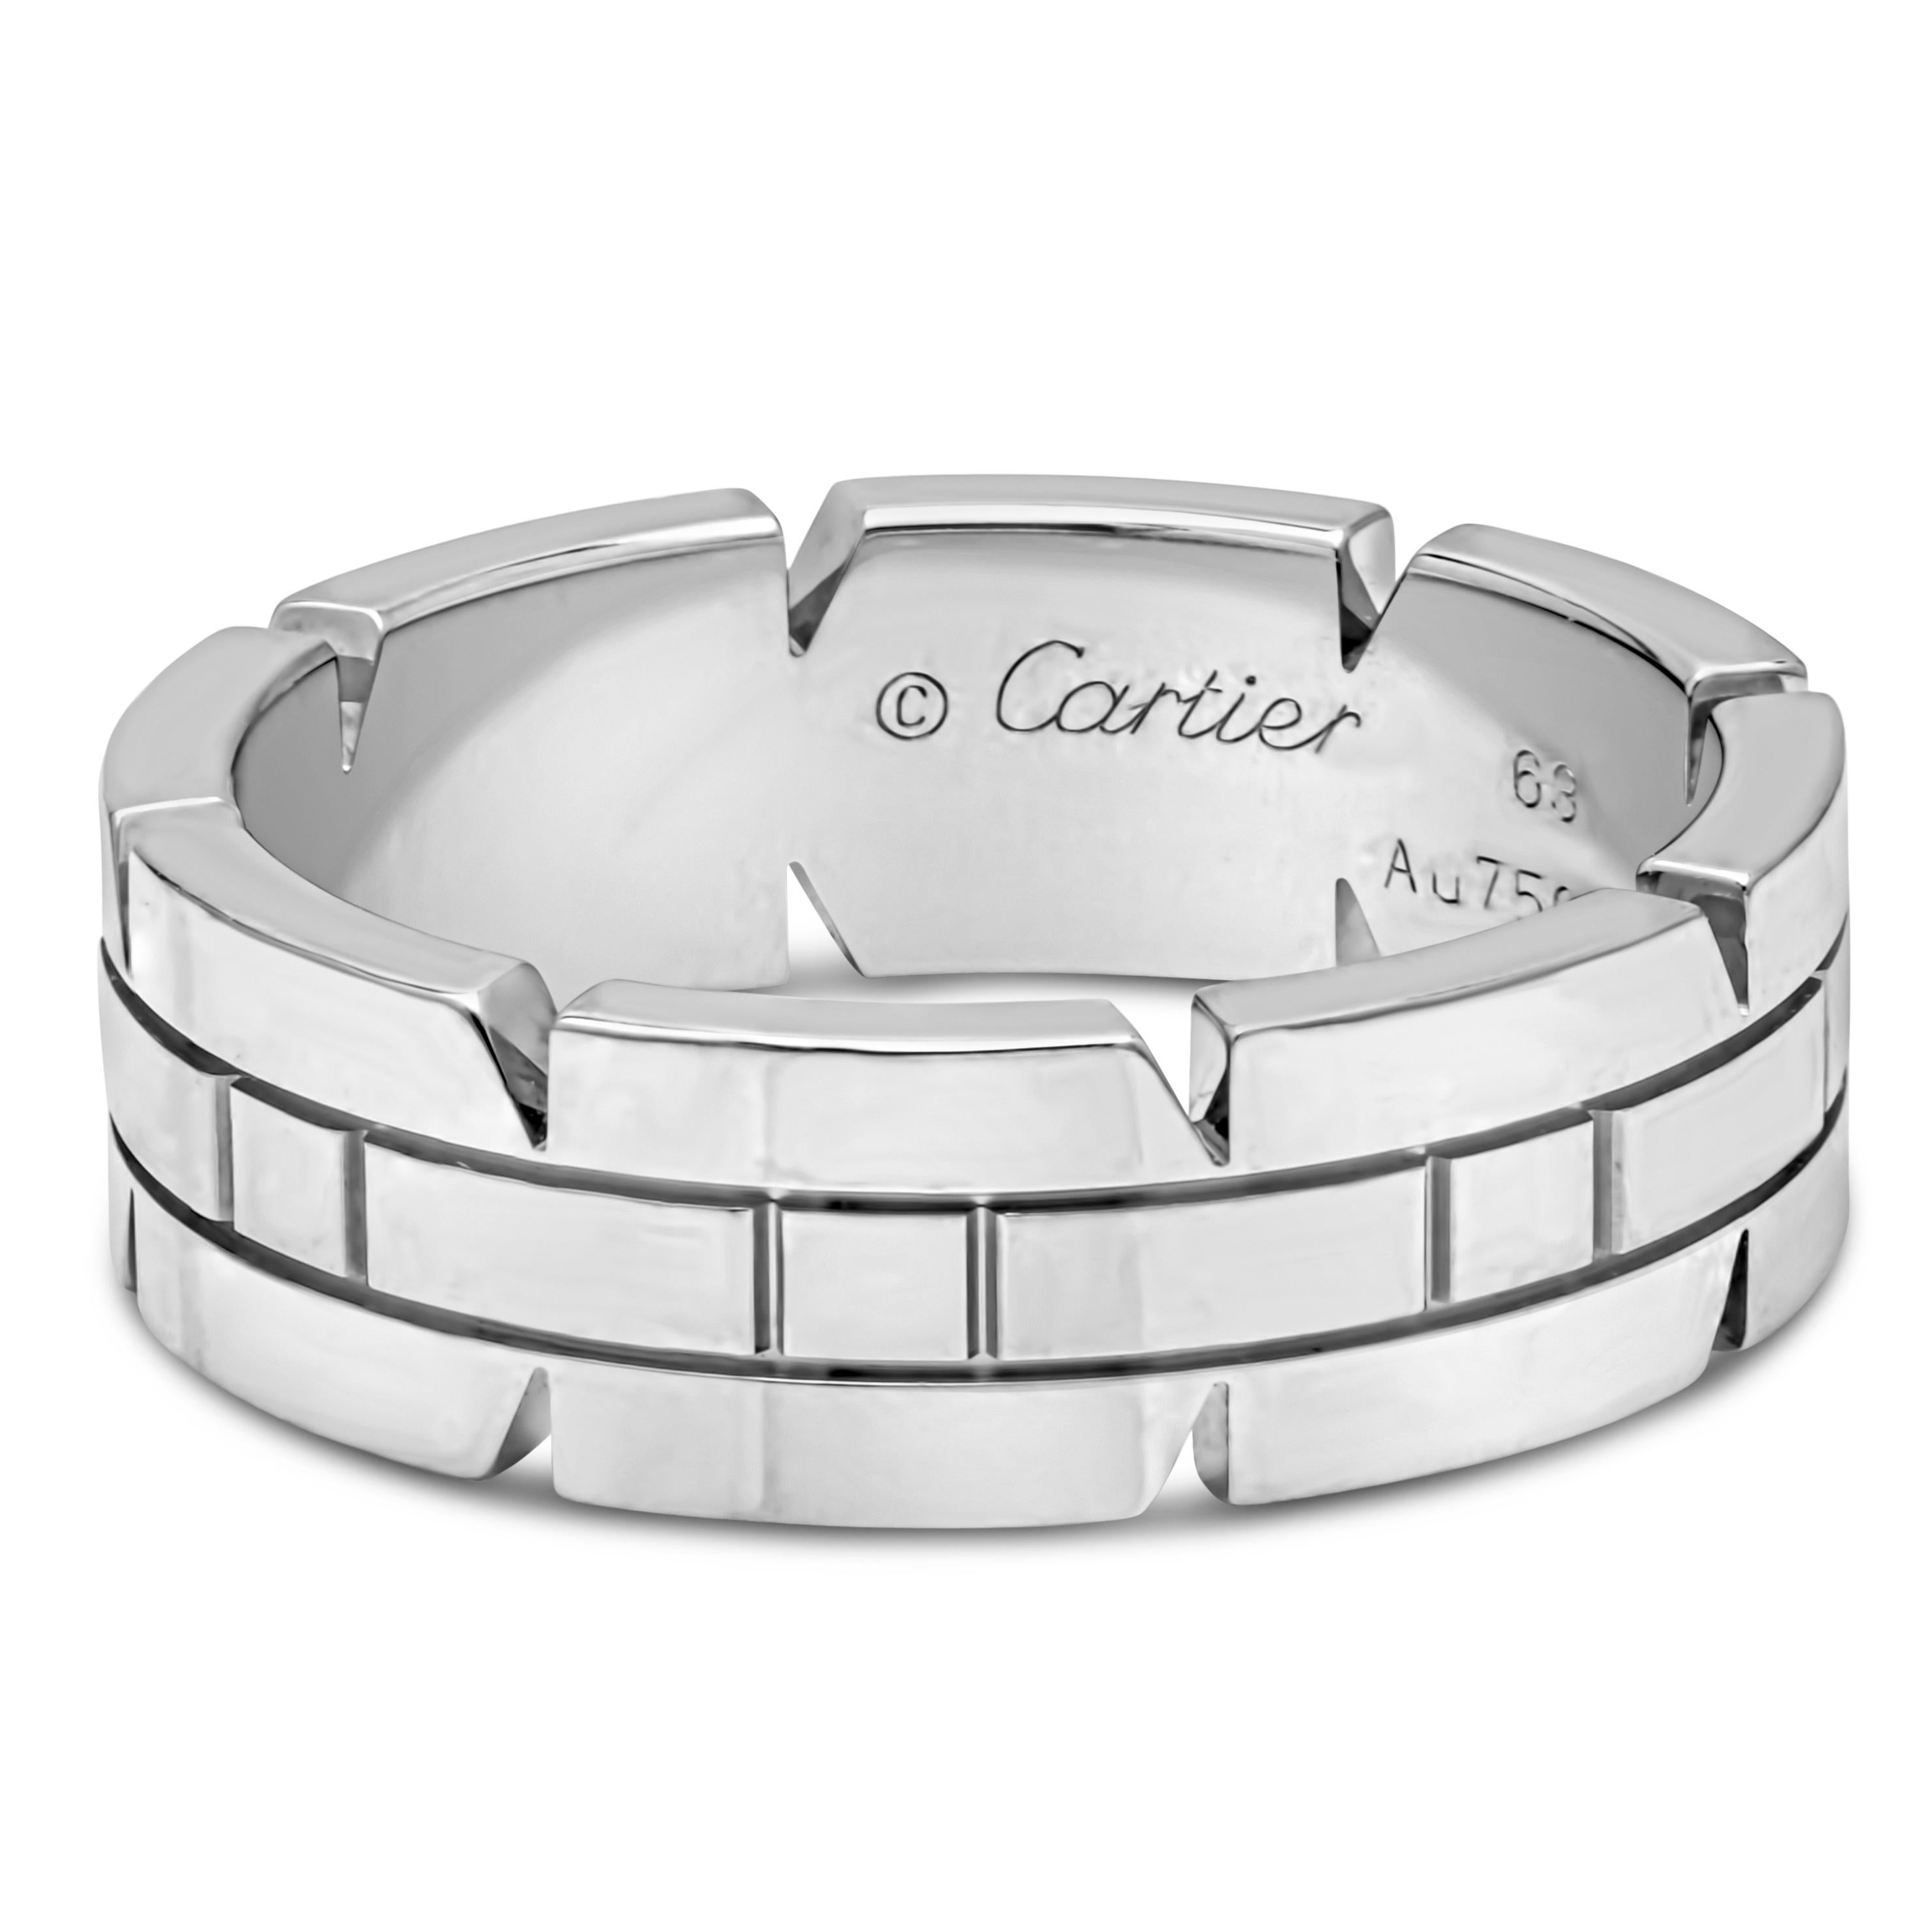 This is an authentic men's wedding band ring by Cartier from the Tank Francaise collection, crafted in 18k white gold with a fine polished finish and 7mm in width. Size 10.5 US resizable upon request.
